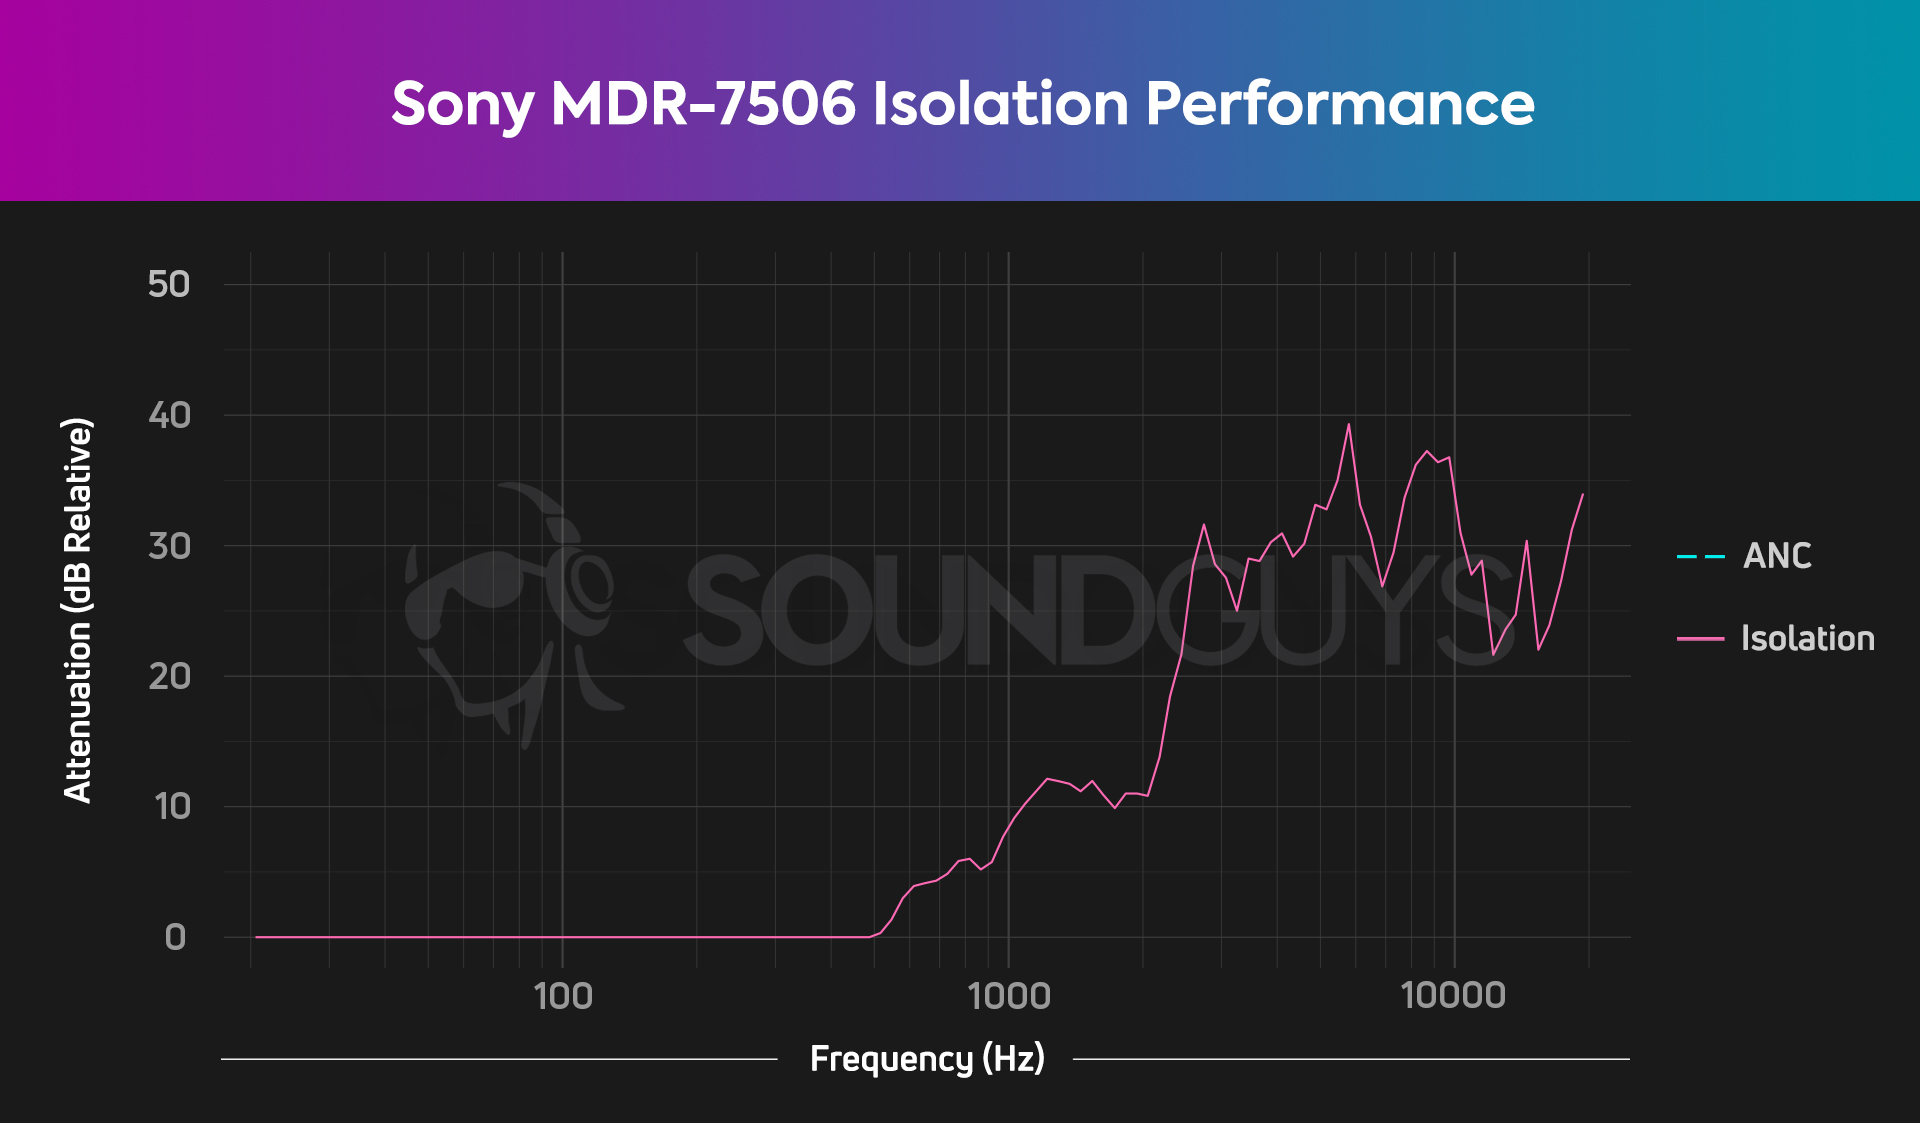 The Sony MDR-7506 blocks out noise above 800Hz, though almost nothing below that.